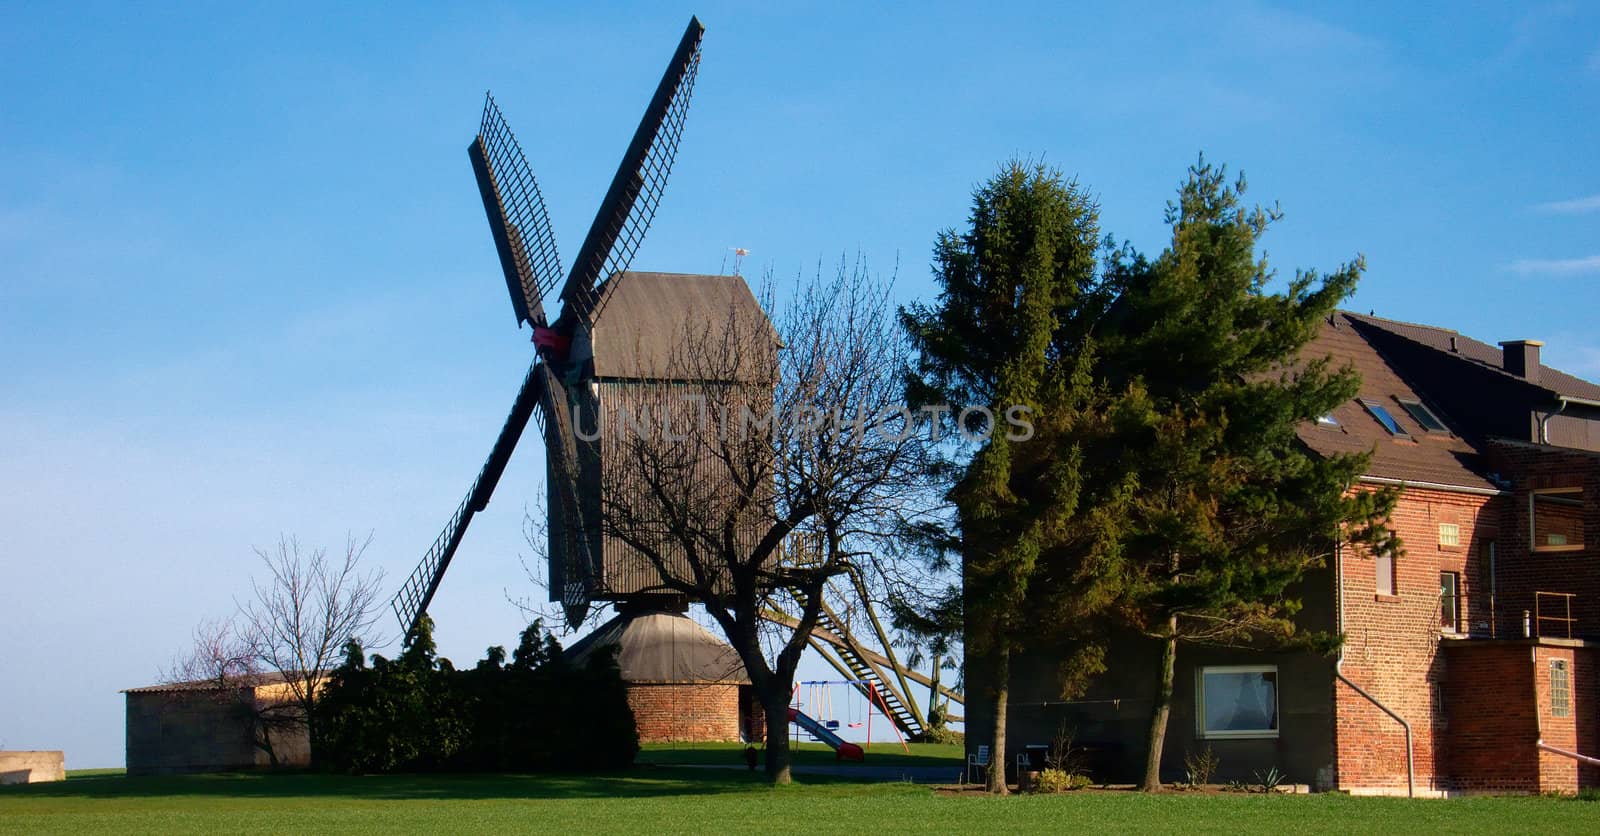 Morning light, traditional windmill  and house, green grass and blue sky